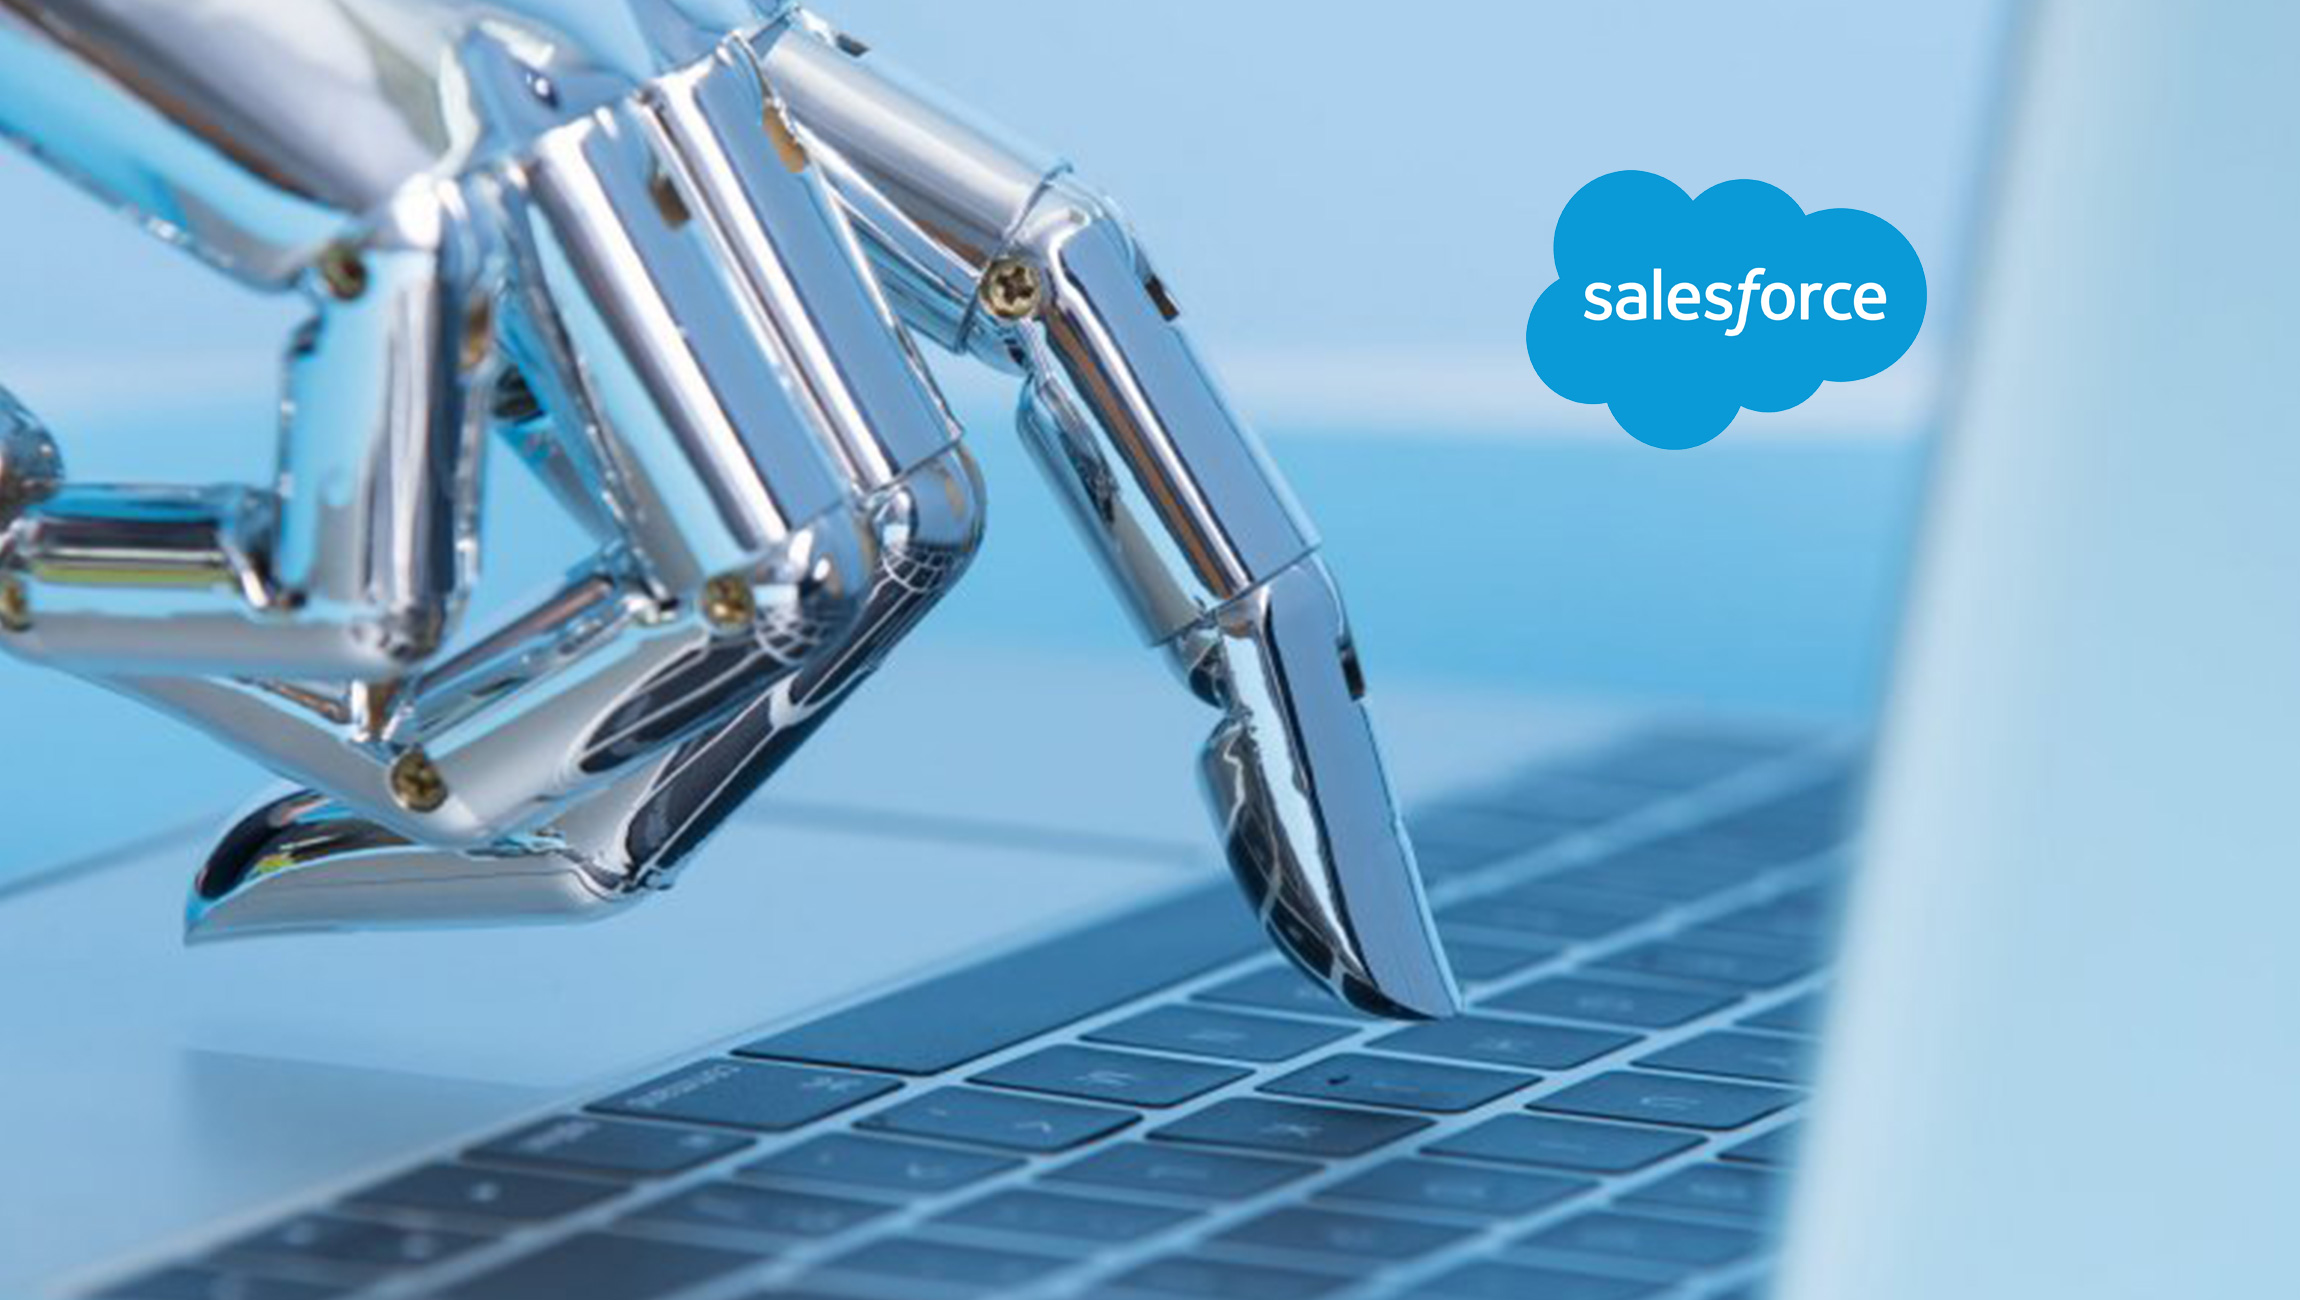 Salesforce Introduces New Einstein Services, Empowering Every Admin and Developer to Build Custom AI for Their Business